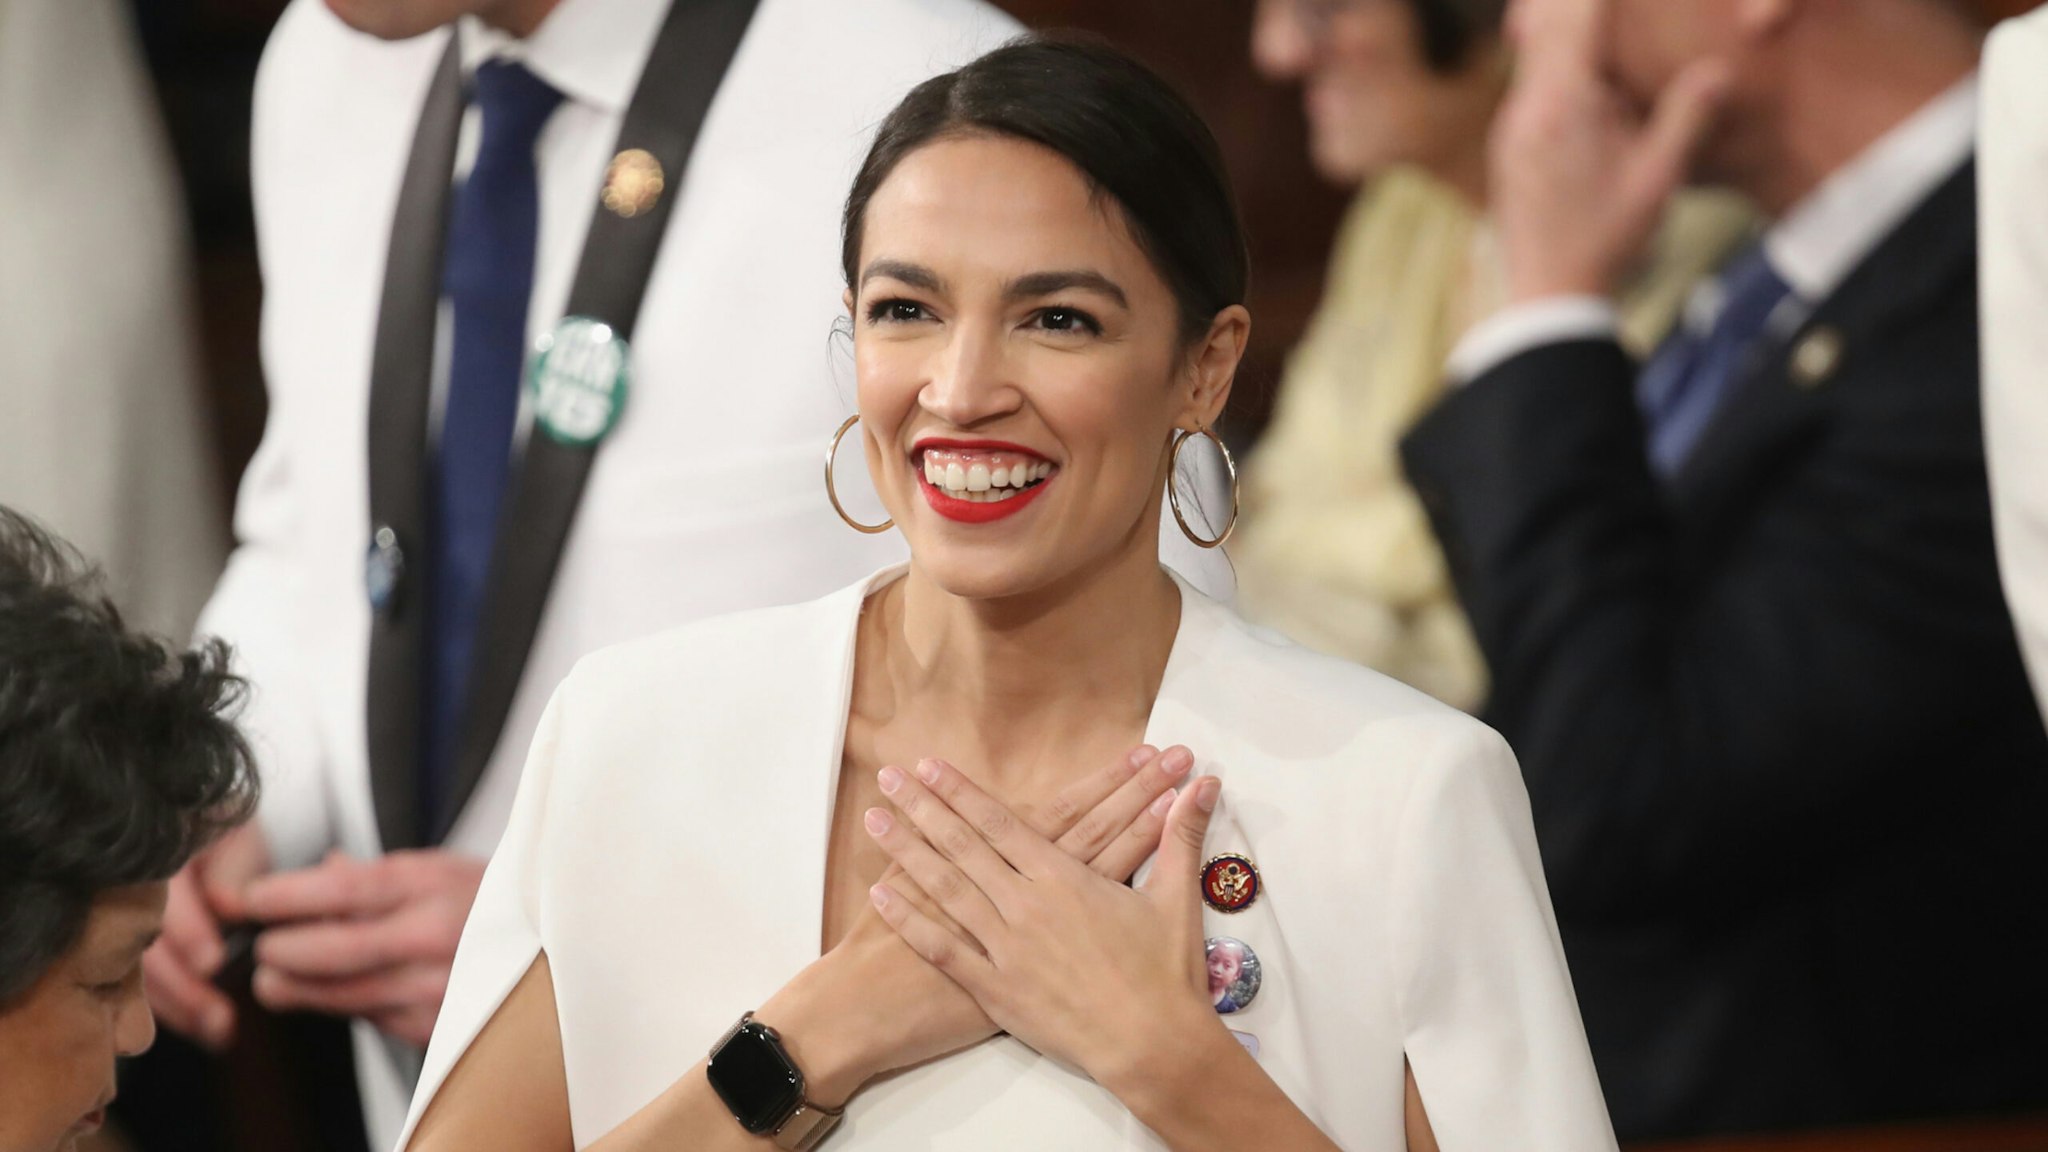 U.S. Rep. Alexandria Ocasio-Cortez (D-NY) greets fellow lawmakers ahead of the State of the Union address in the chamber of the U.S. House of Representatives on February 5, 2019 in Washington, DC.